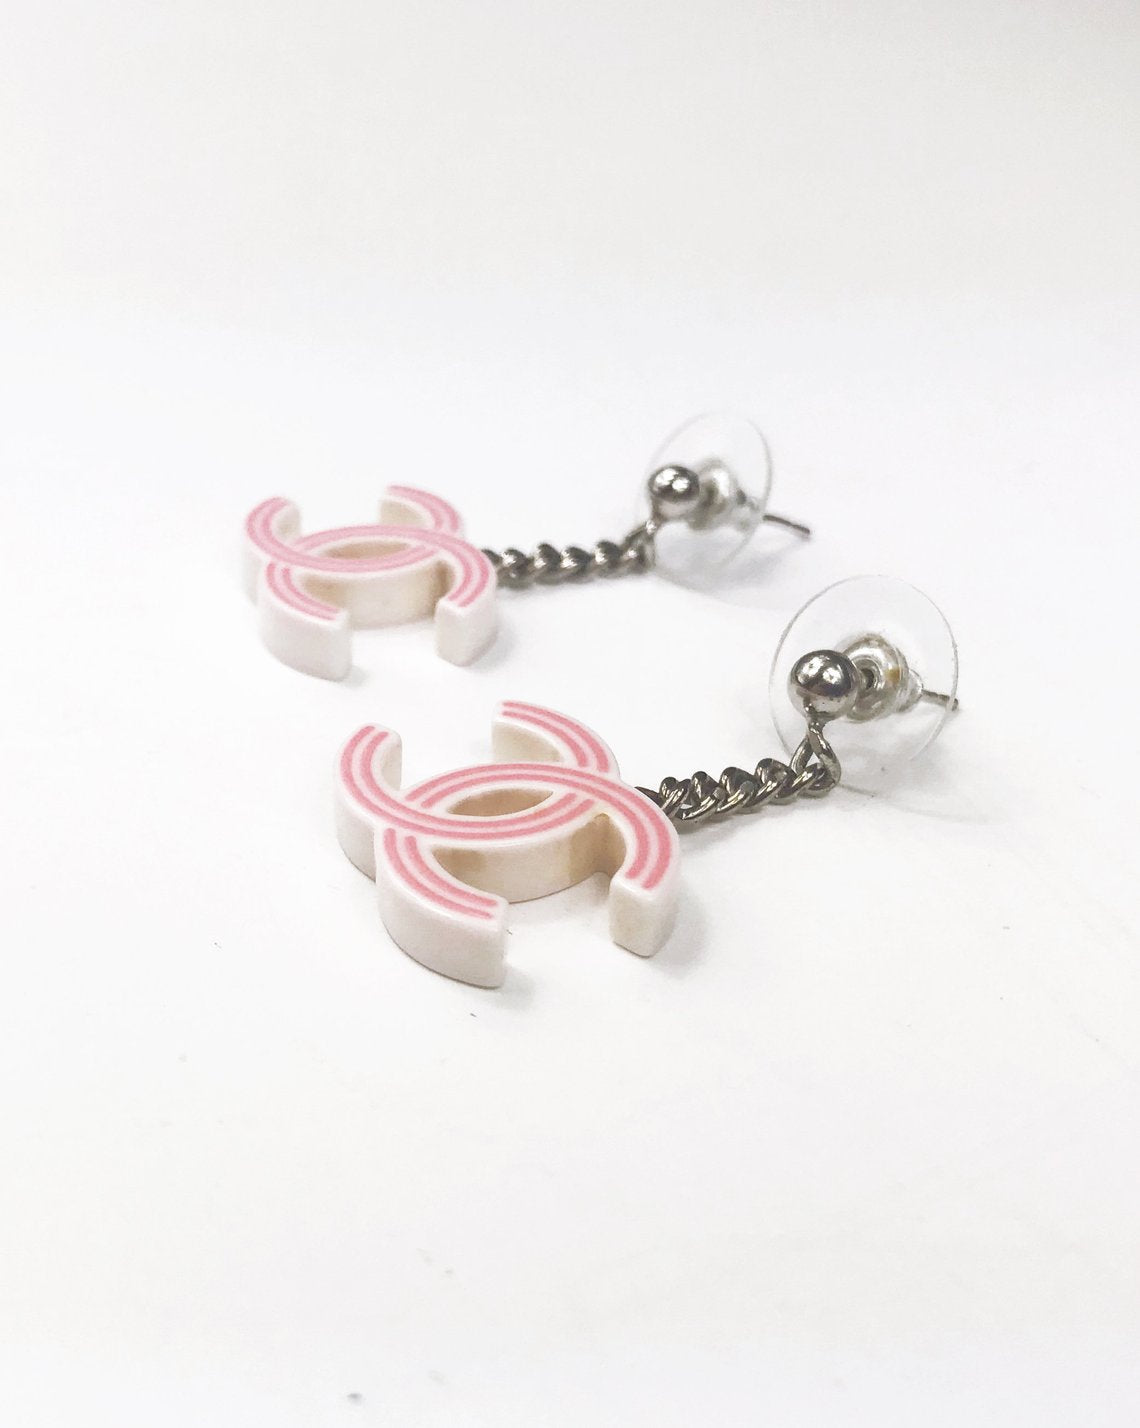 Fruit Vintage Chanel pink and white drop earrings. Features a chain drop and candy style CC logo, comes with original Chanel tag and box.